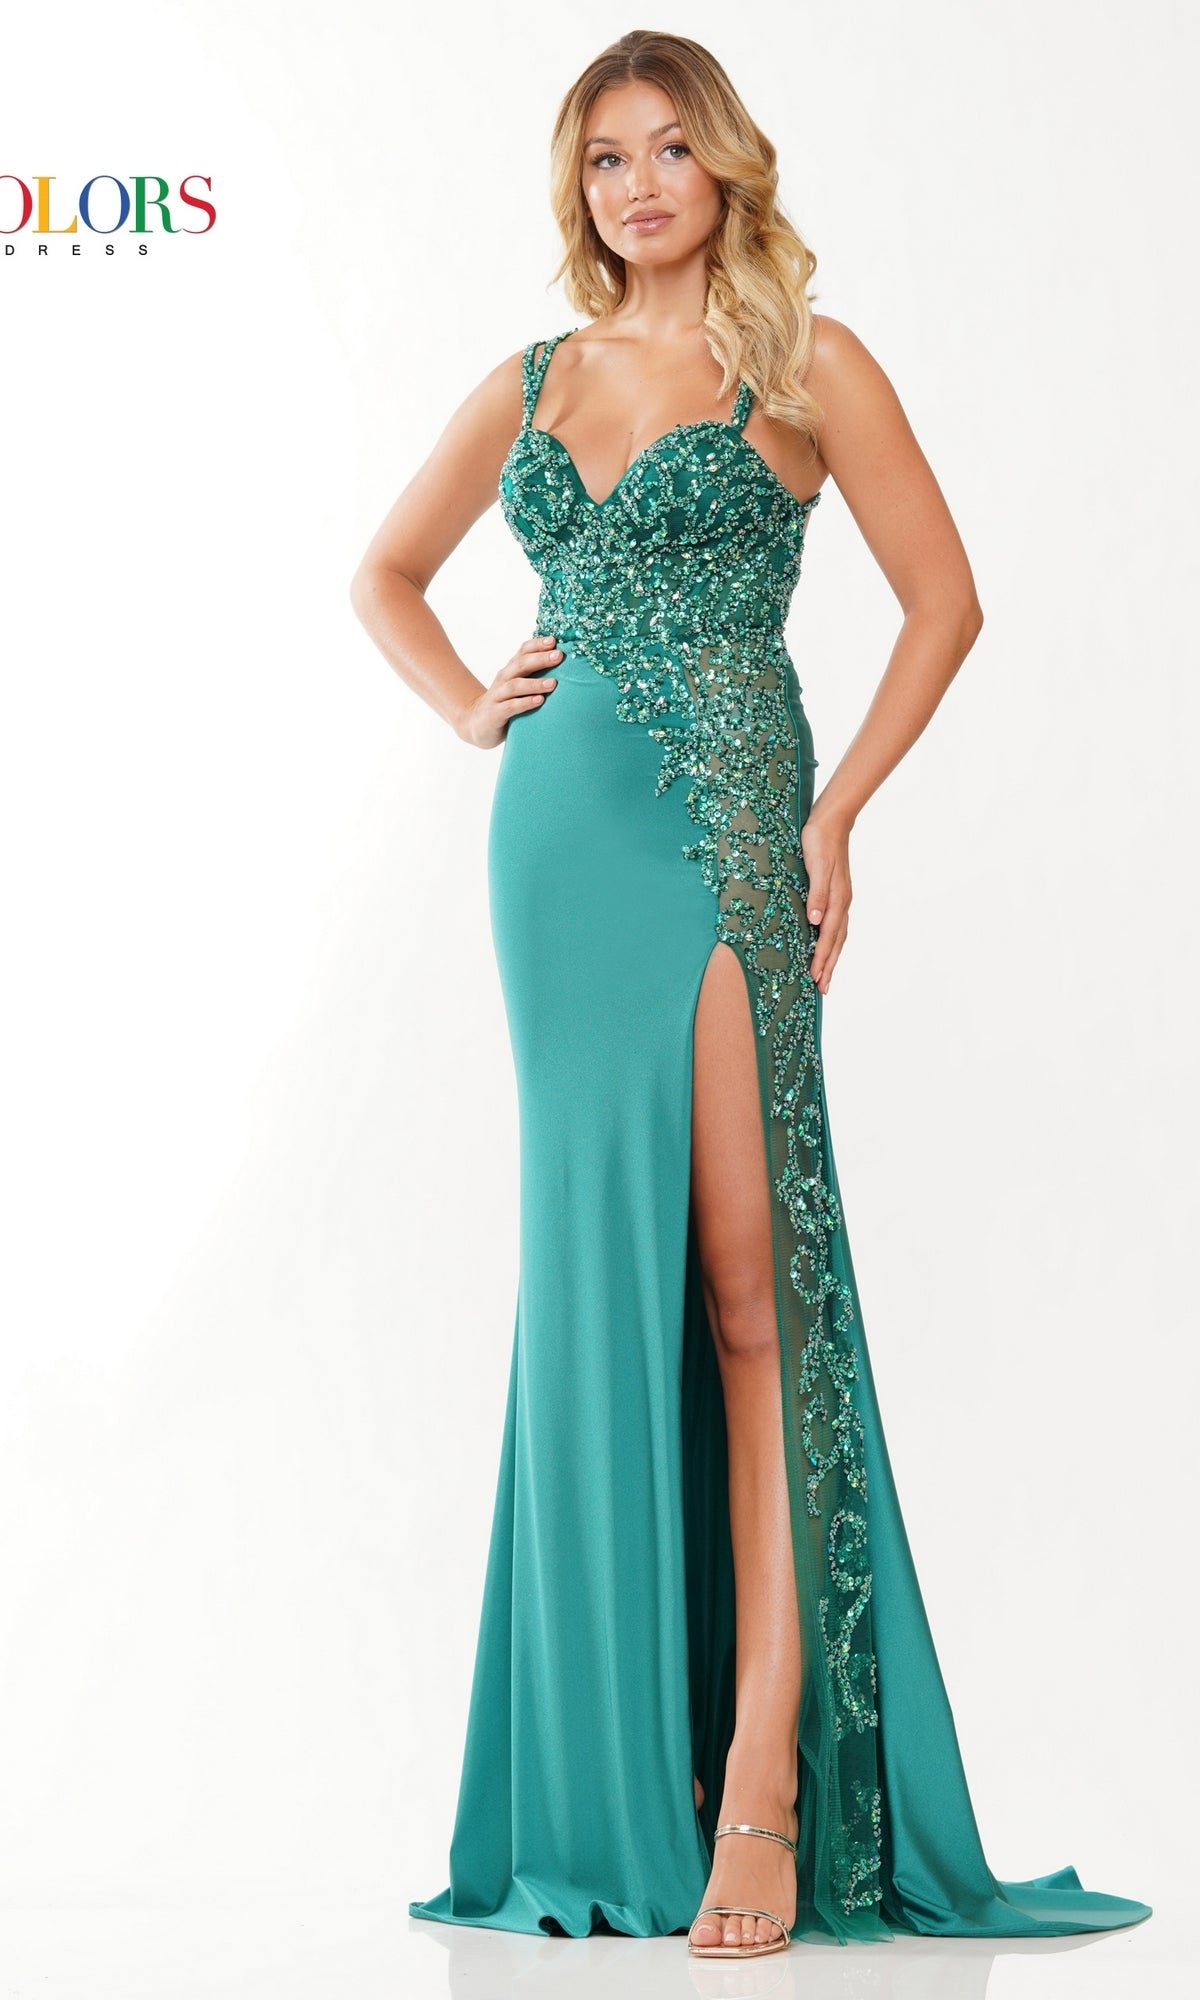 Sequin-Mesh Long Prom Gown 3306 by Colors Dress